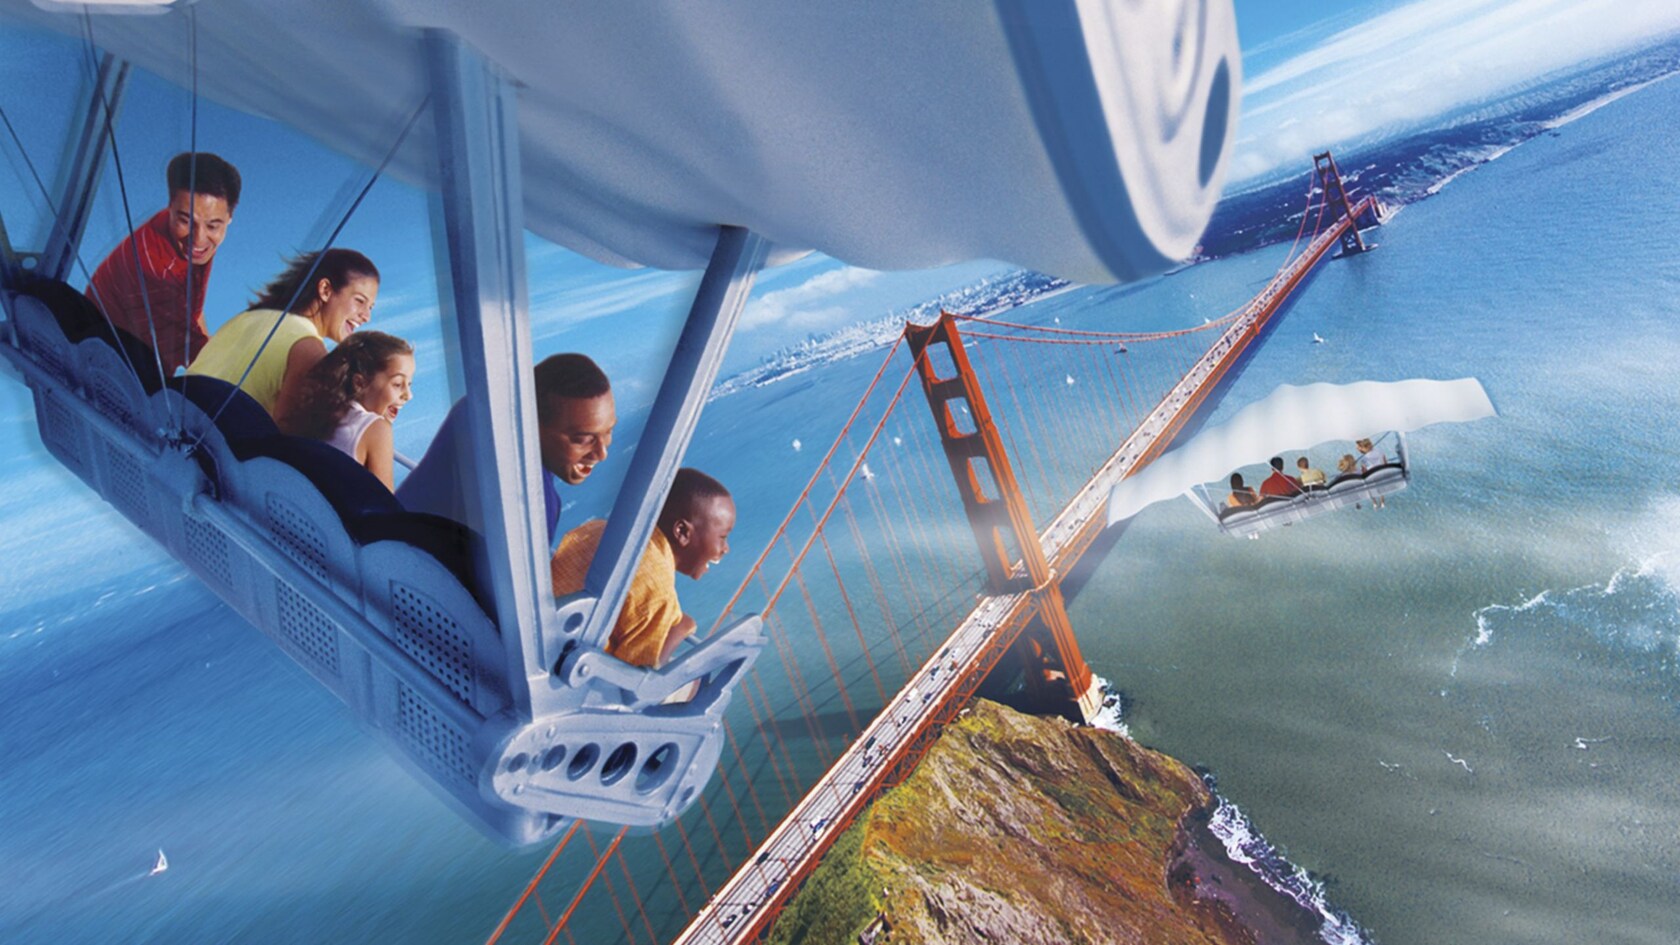 A family smiles while flying over the Golden Gate Bridge on the Soarin Over California attraction